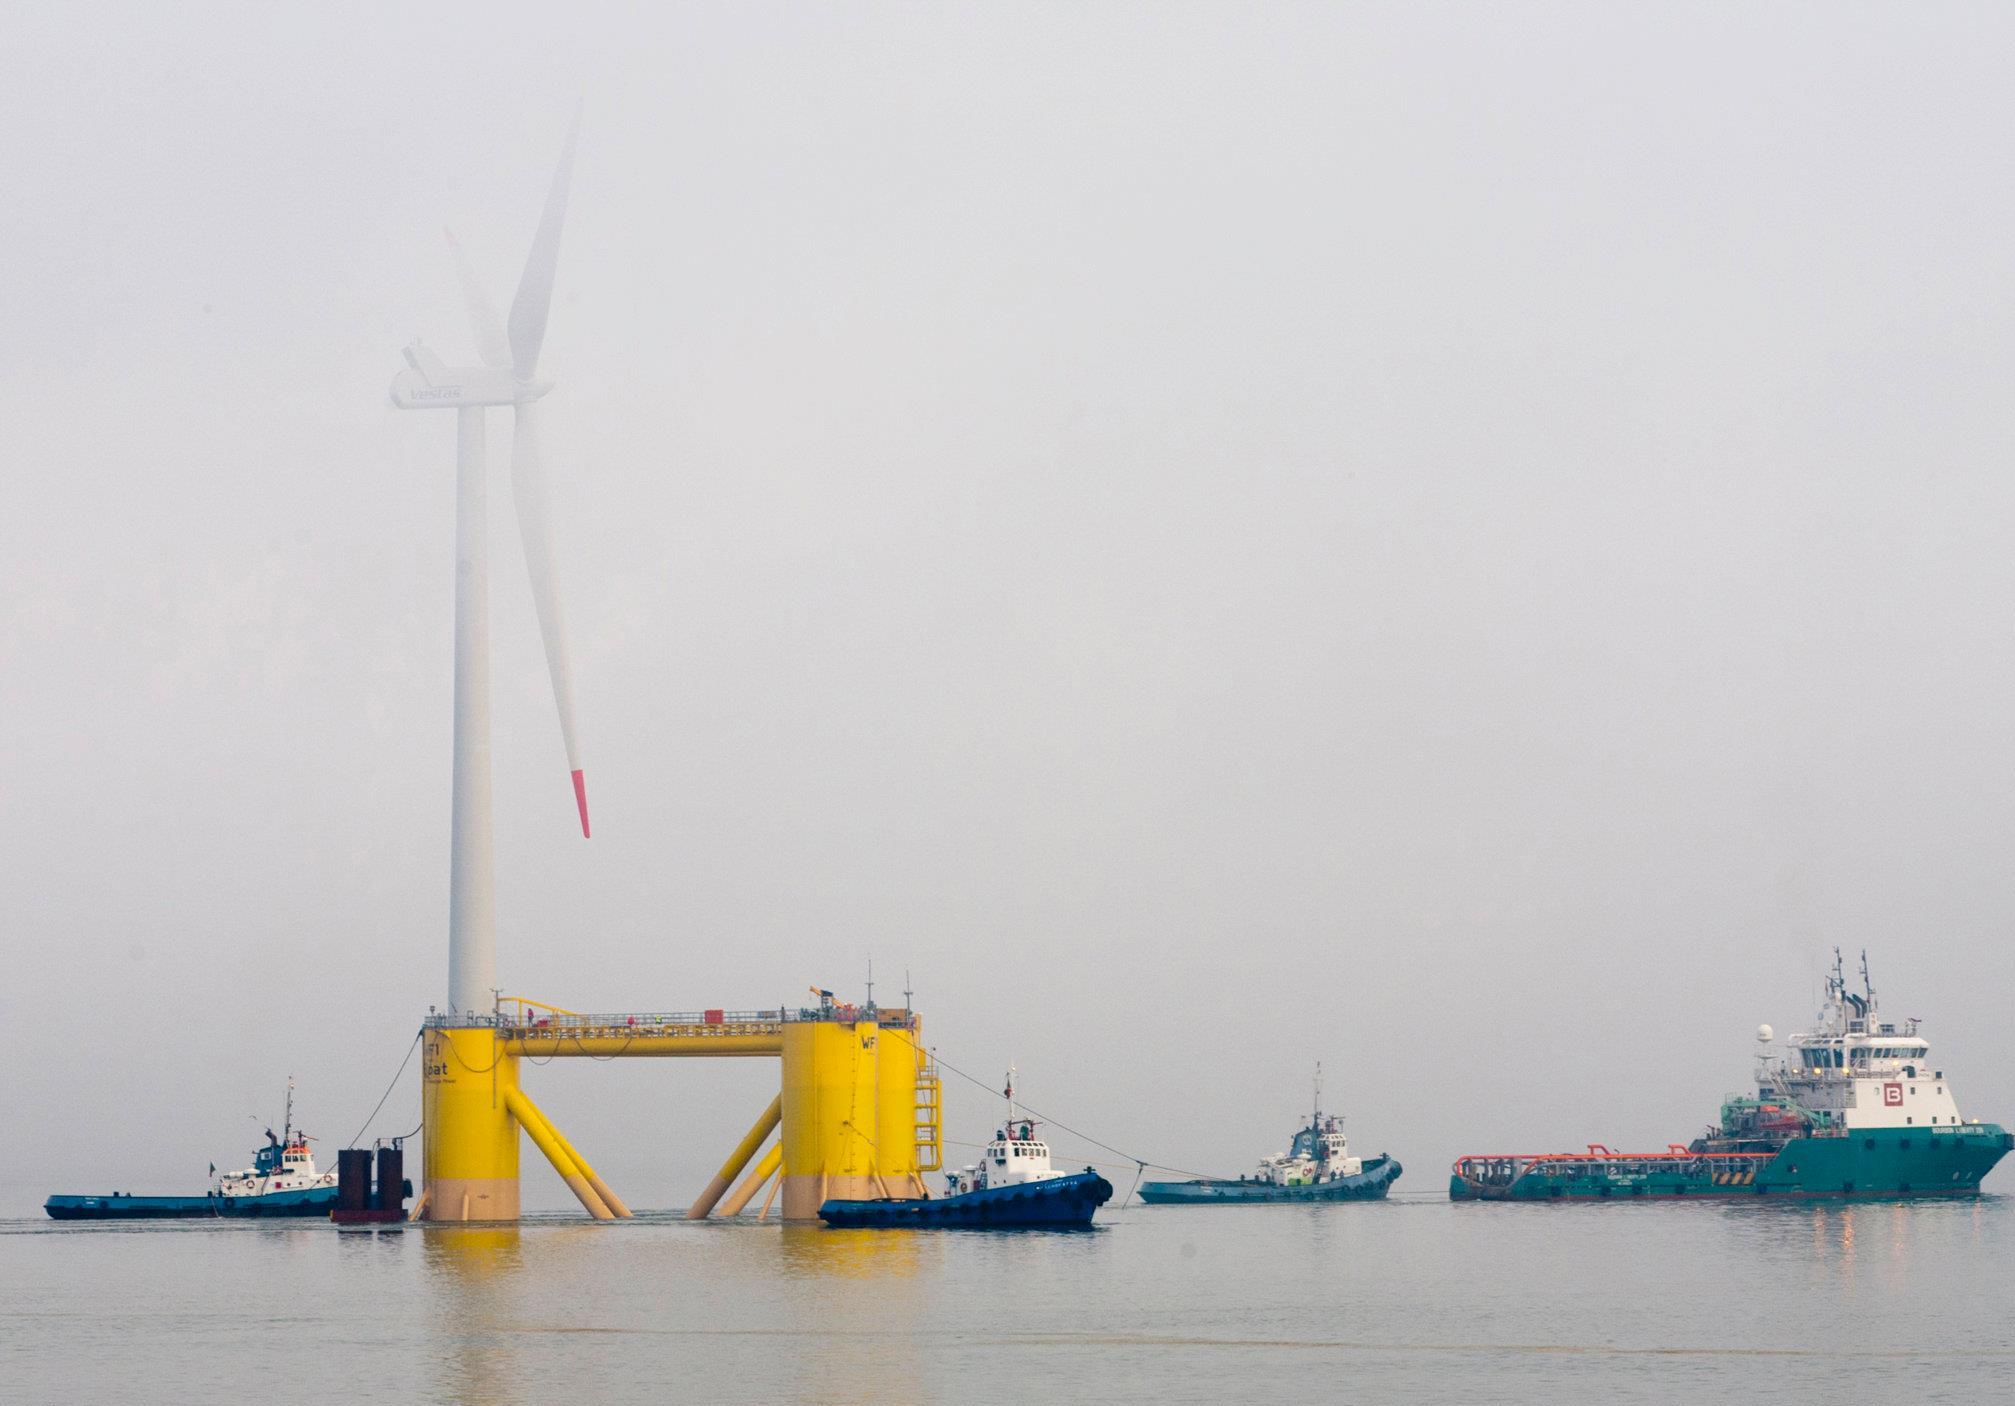 UK: TAG to Work with Principle Power on Developing Wind Turbine Floating Support Structures